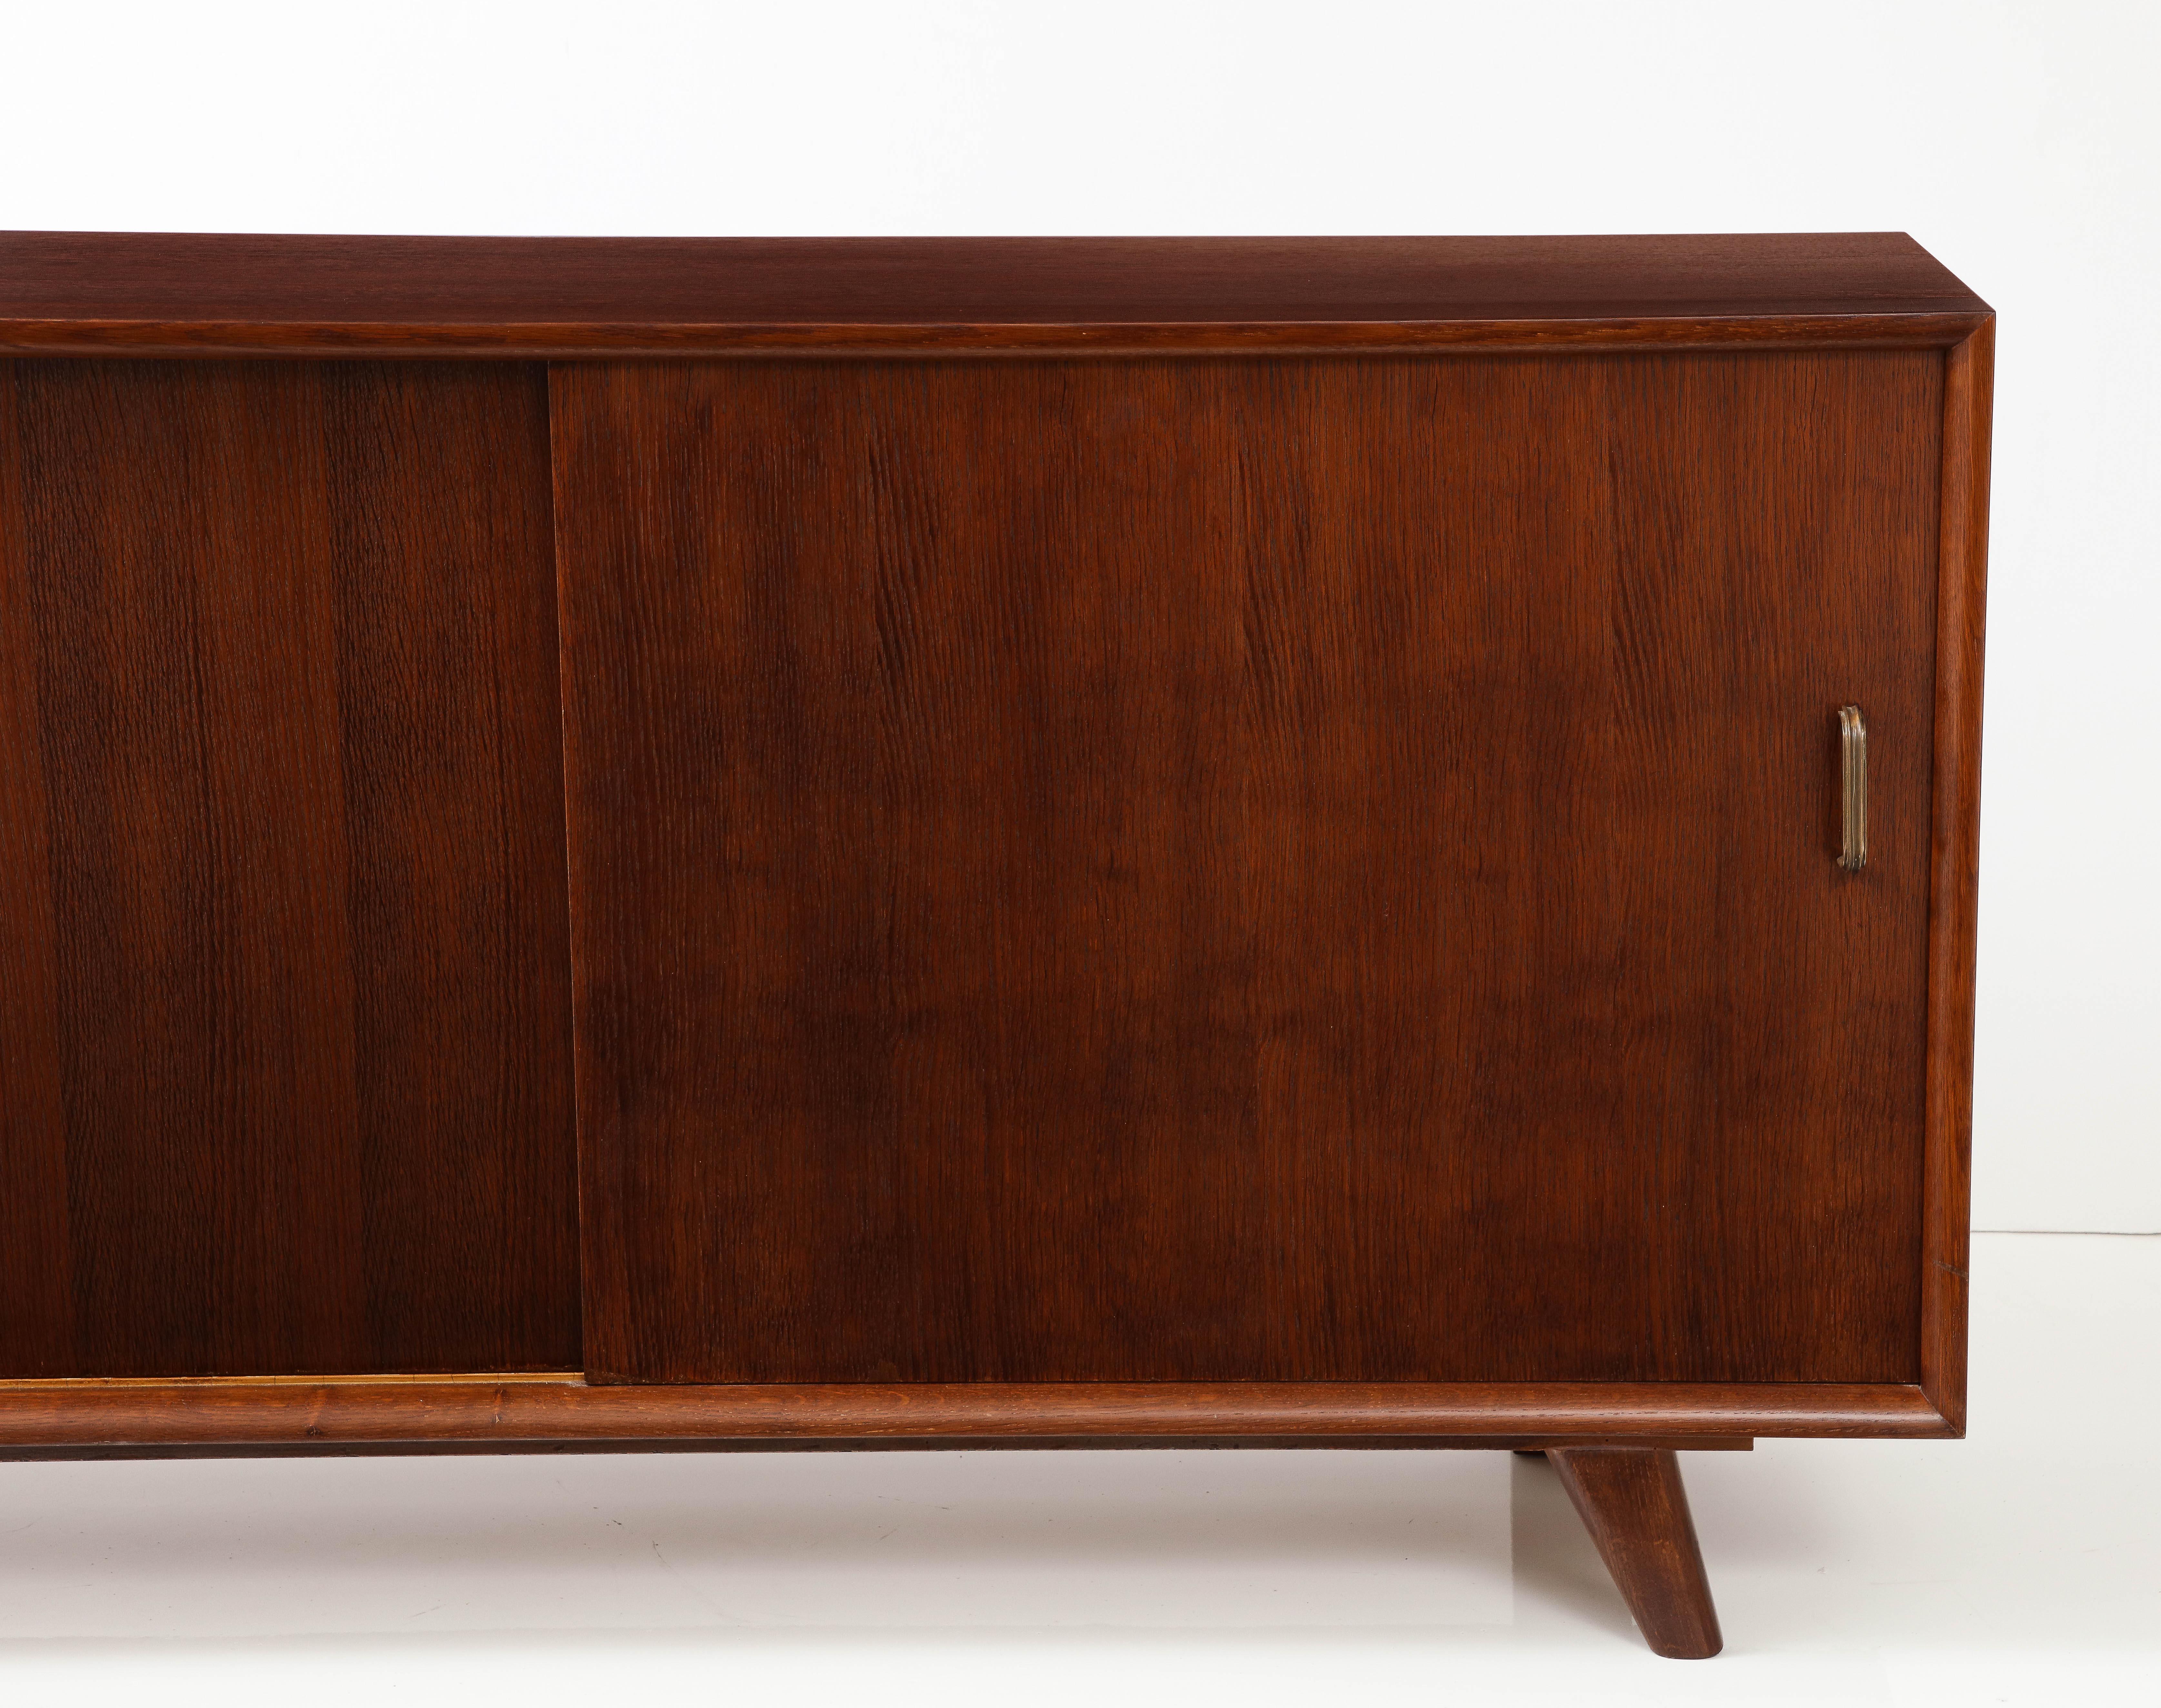 French Oak Sideboard with Sliding Doors & Shelves, 1950's For Sale 1